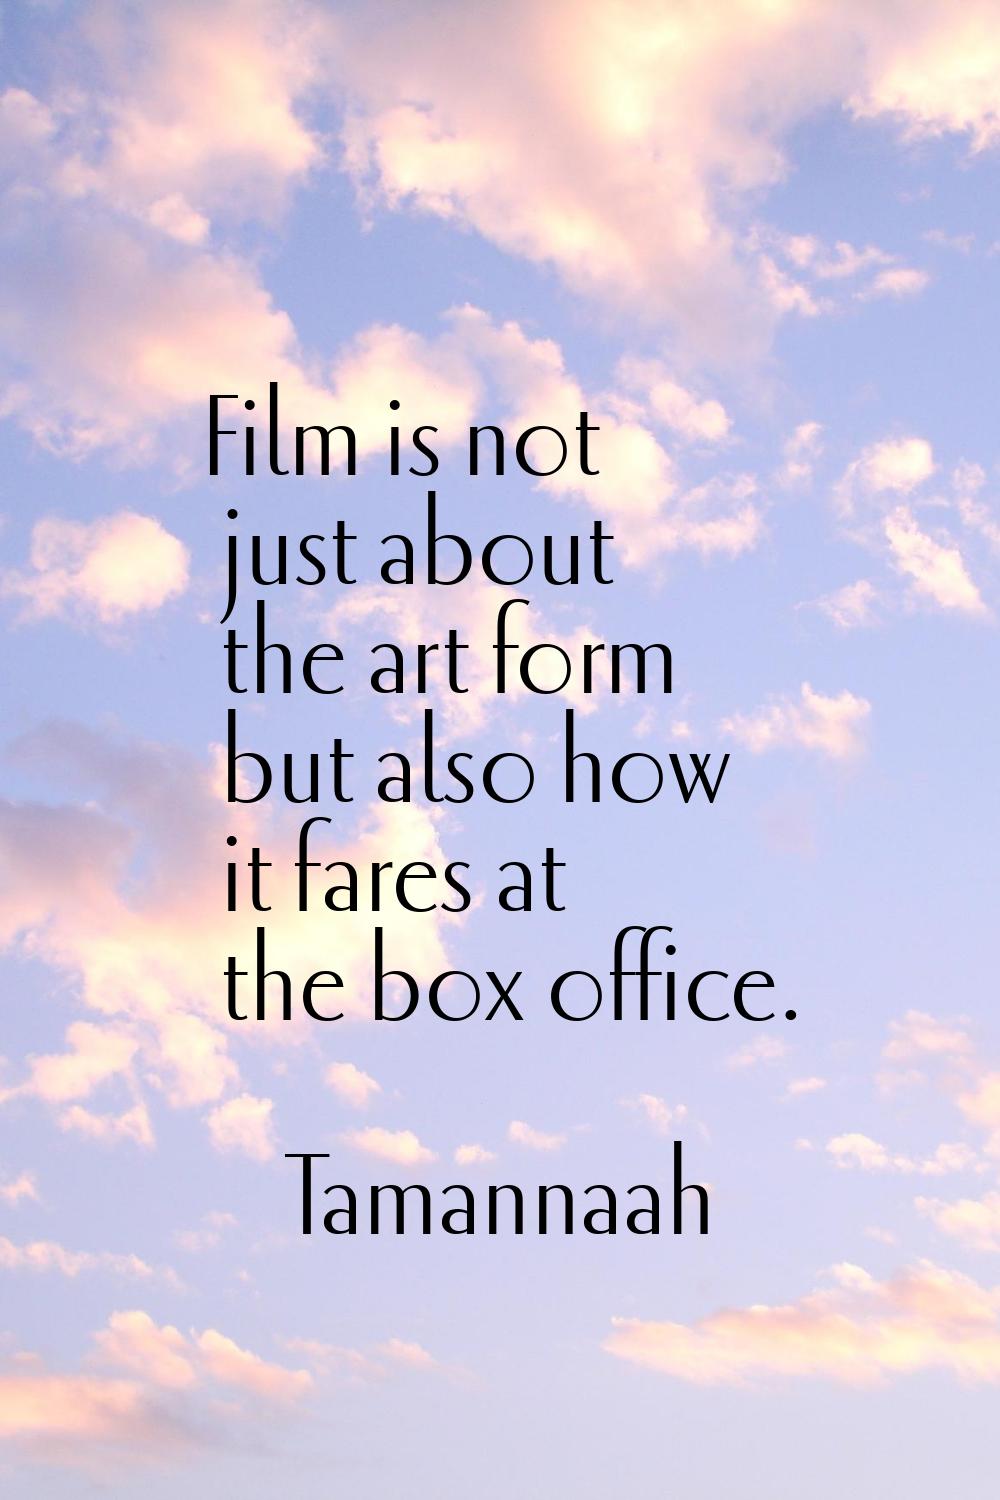 Film is not just about the art form but also how it fares at the box office.